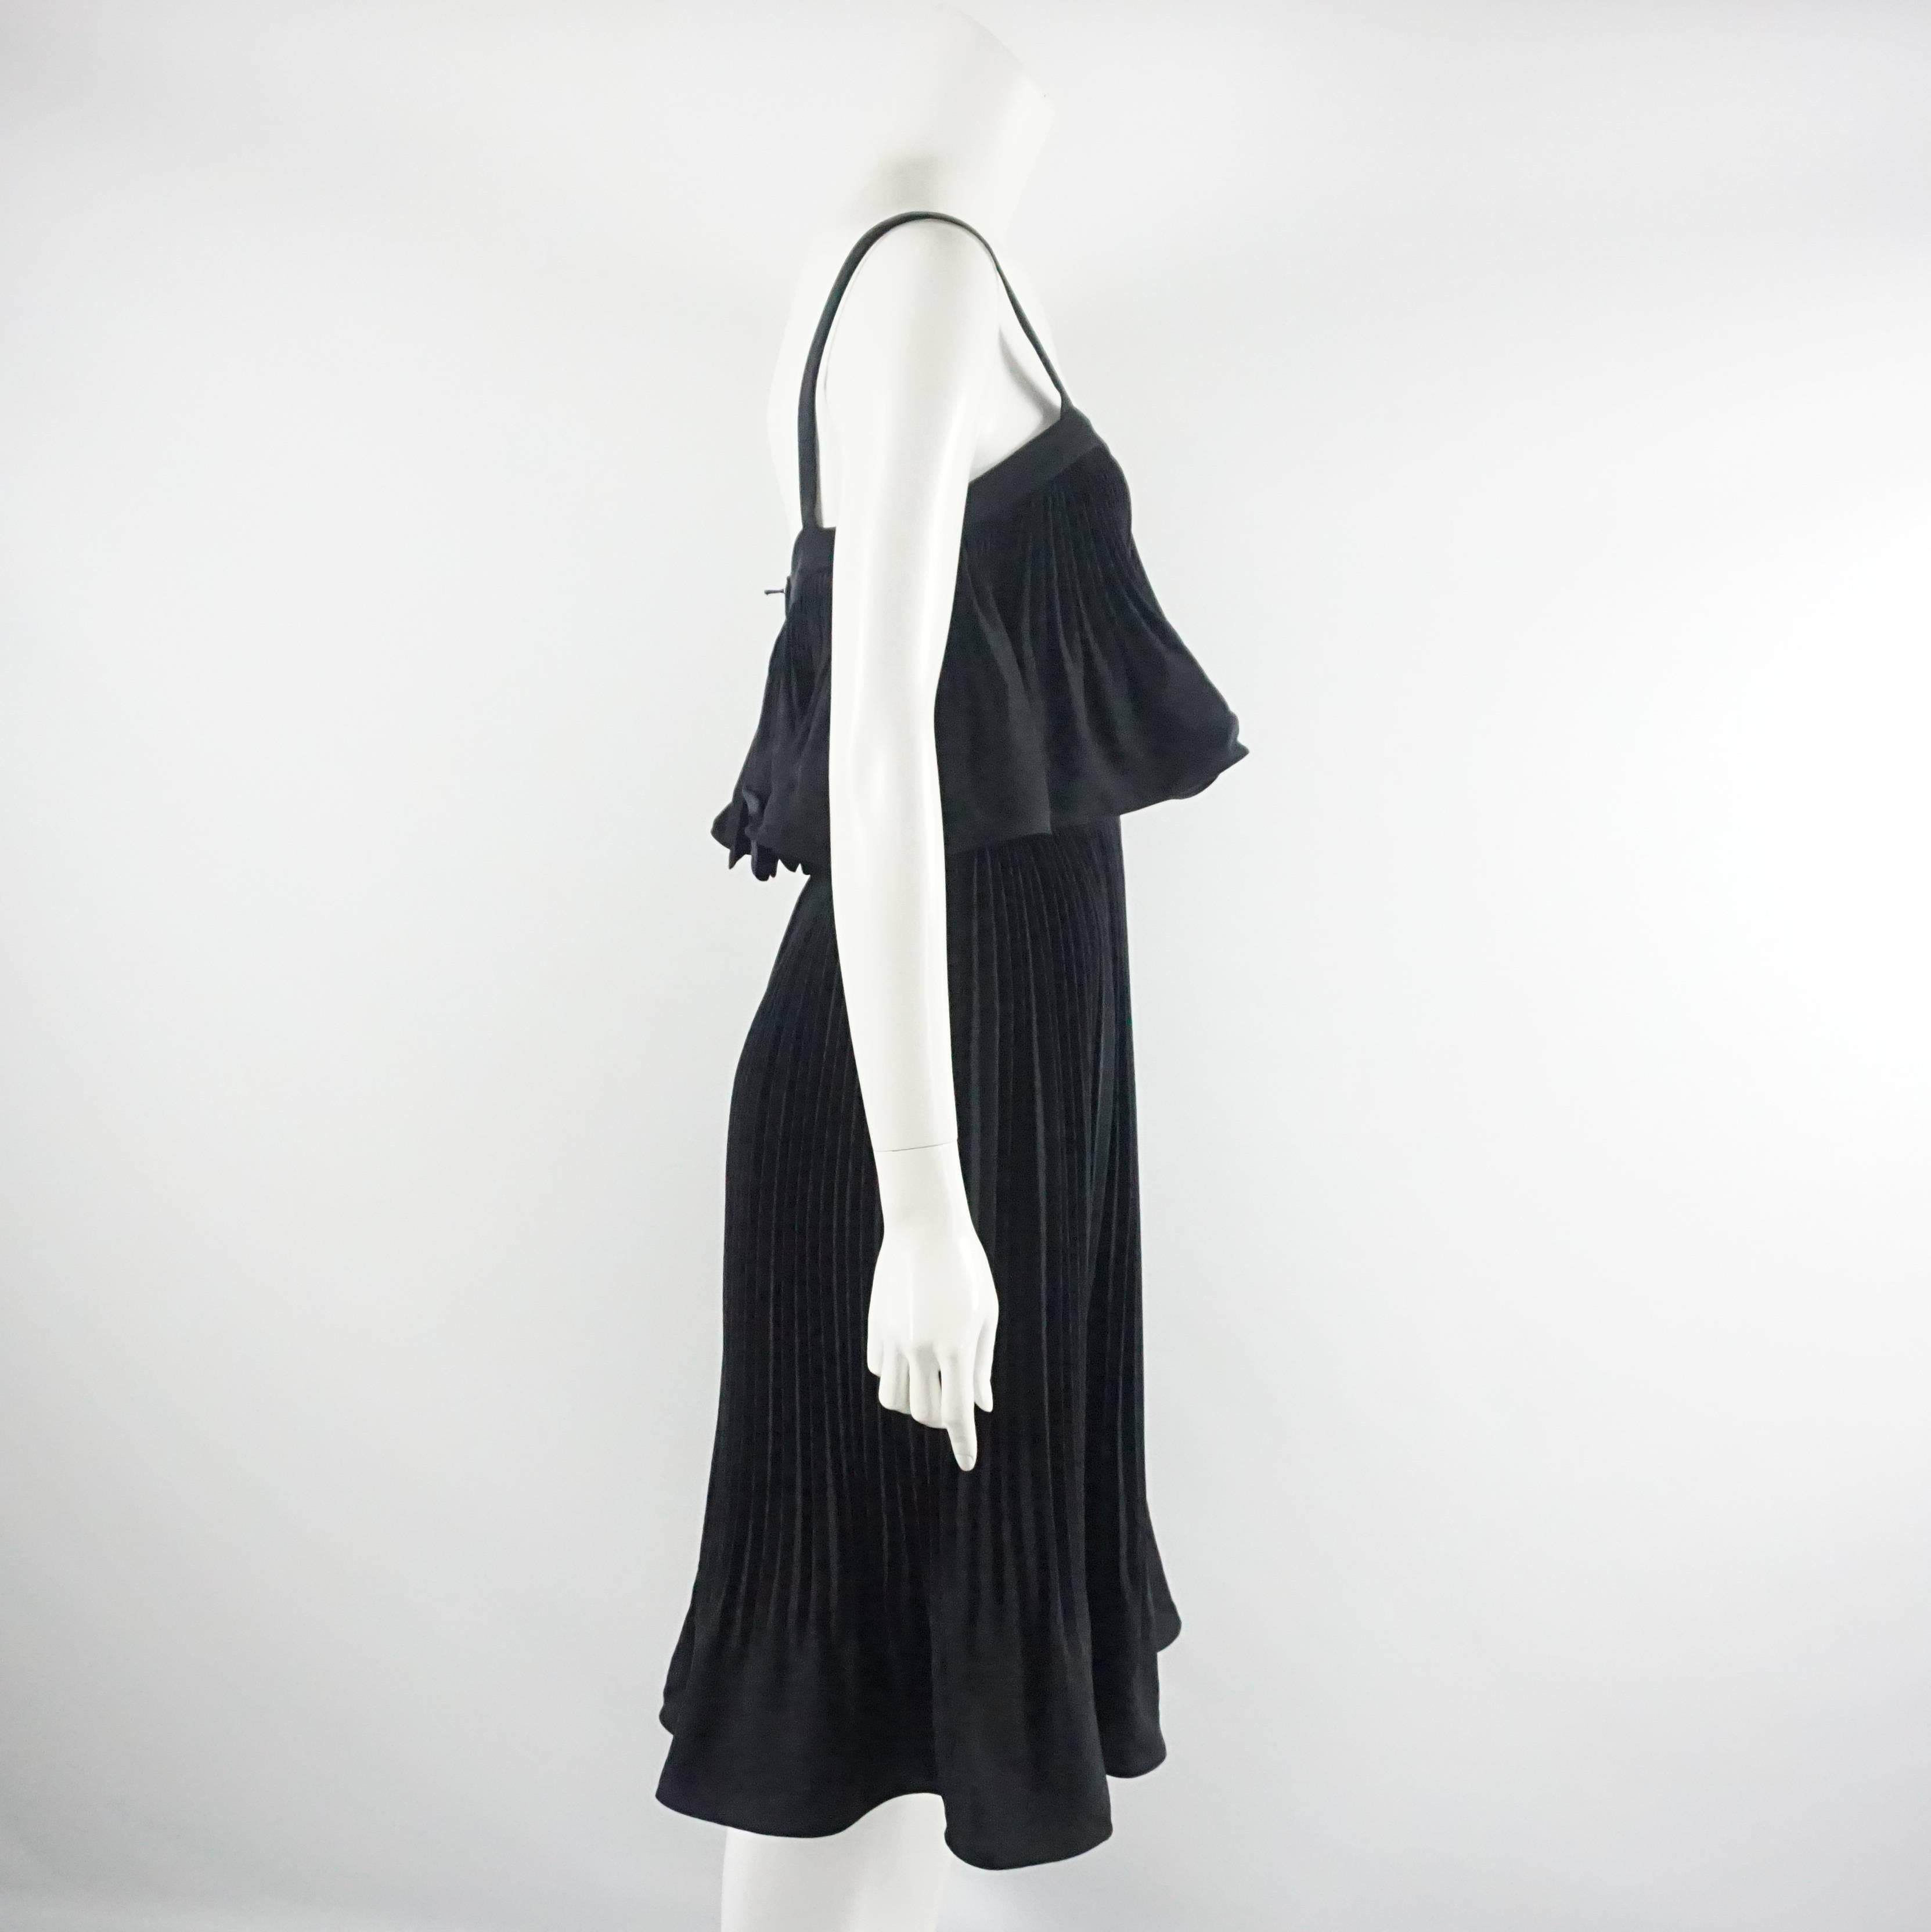 This gorgeous Nina Ricci haute couture dress is made of silk and is entirely pleated. It has thin straps and a ruffle flounce over the bust. The piece is in excellent condition with minimal wear. Size 4, 1986. 

Measurements
Bust: 35